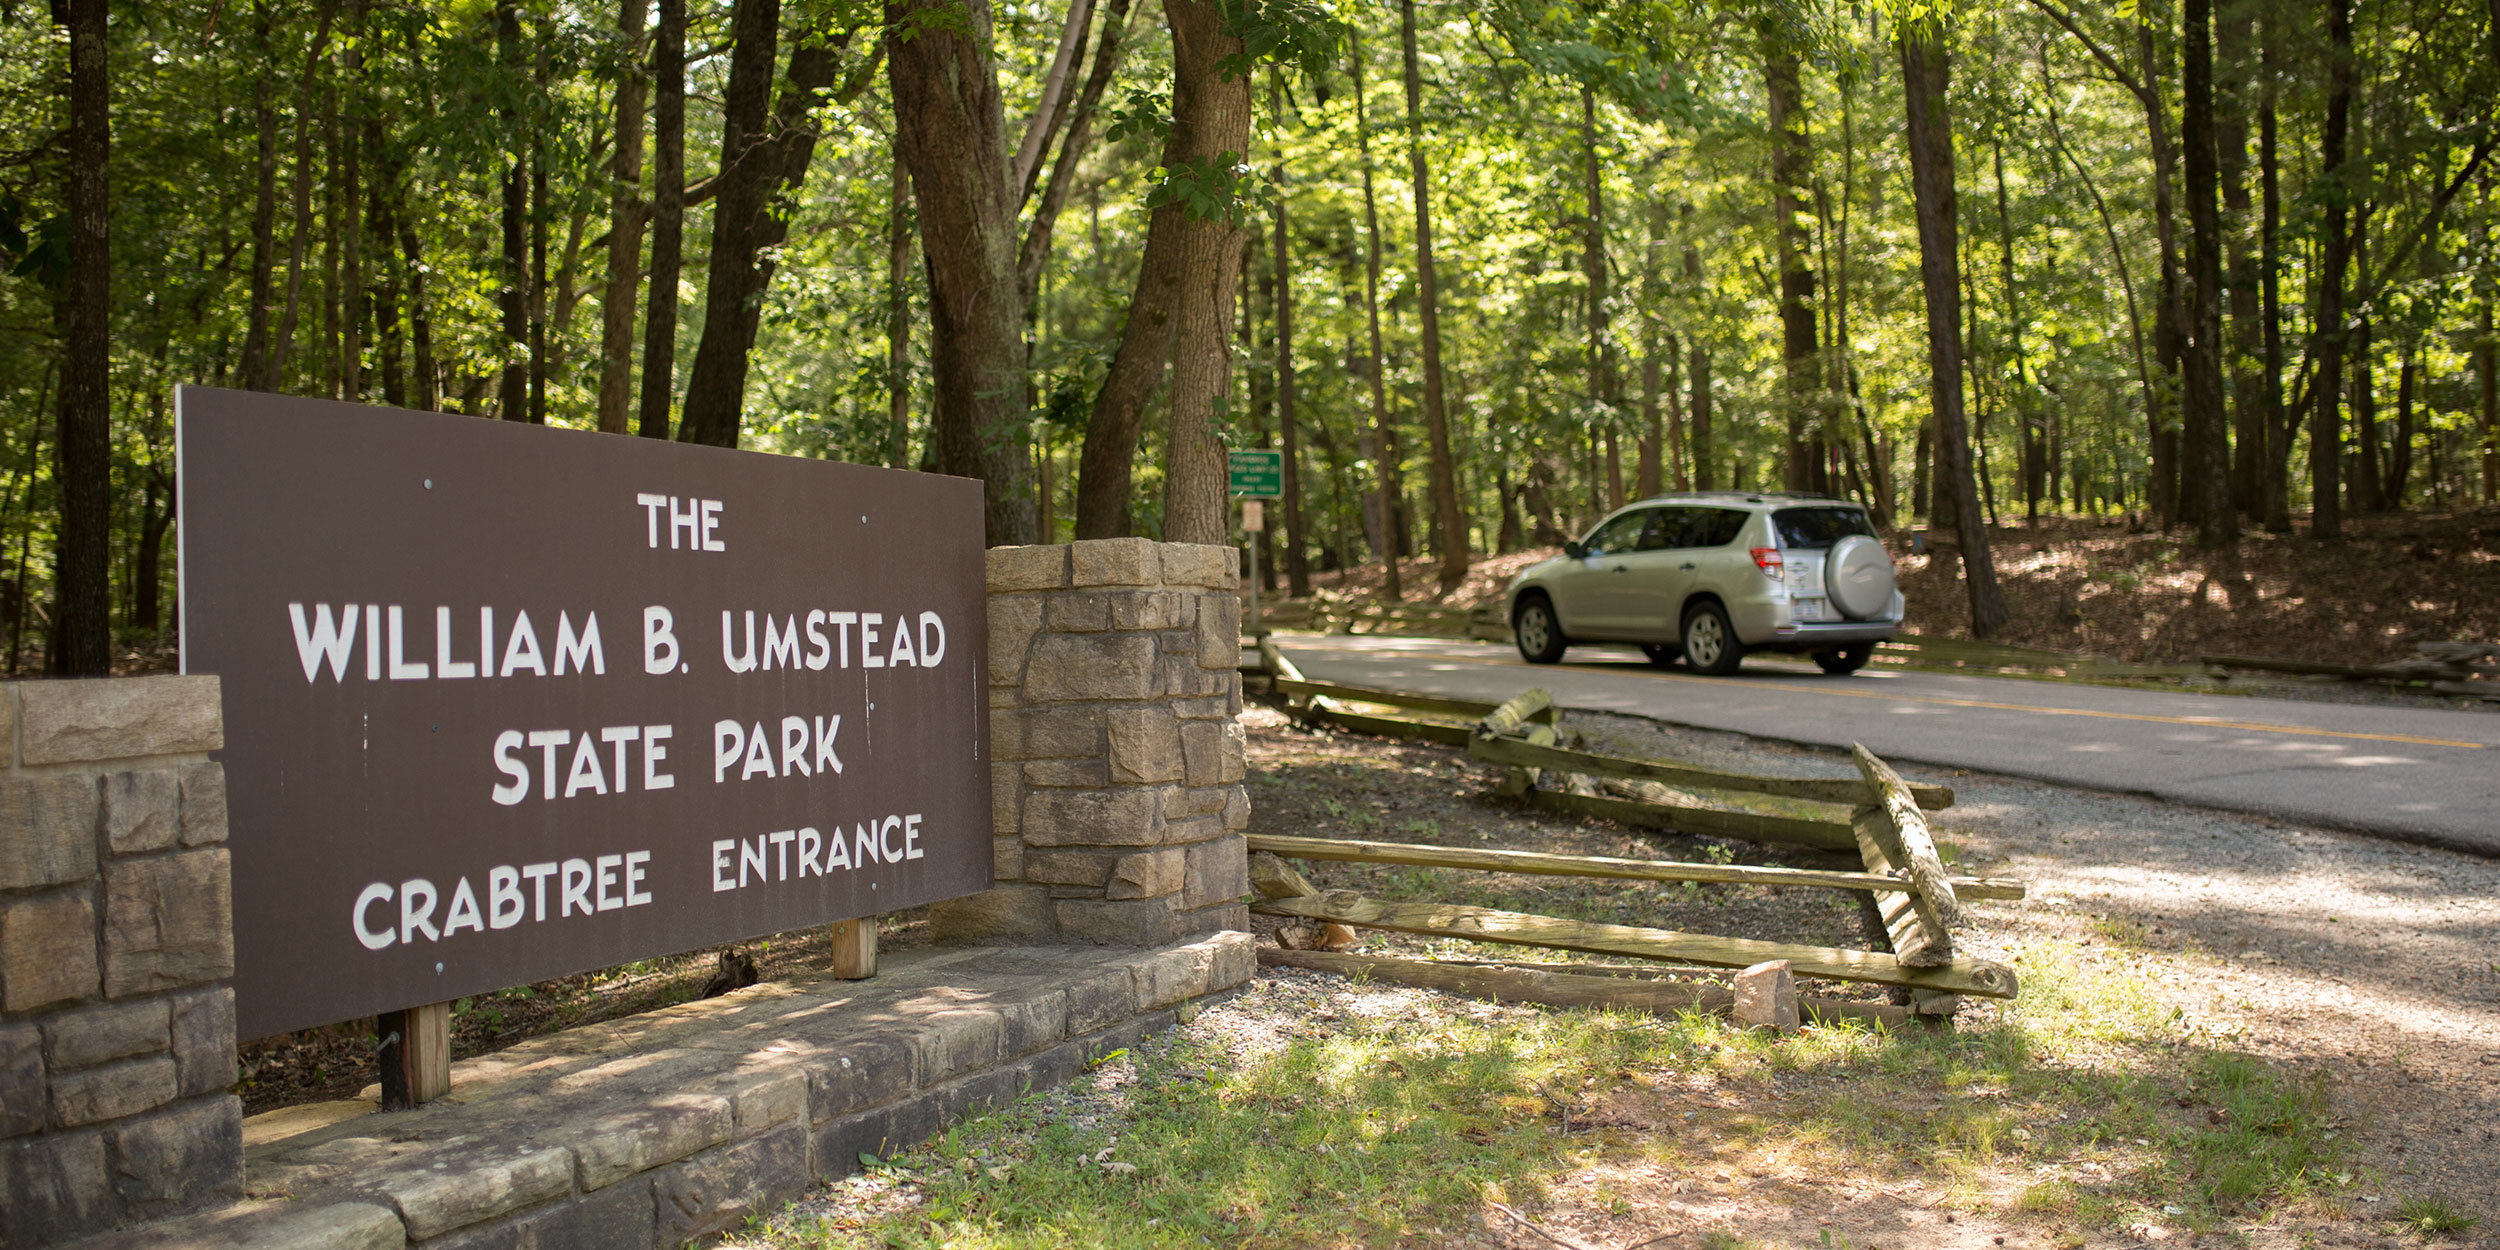 Entrance sign to William B Umstead State Park Crab Tree entrance with trees and a car in the background in Wake County